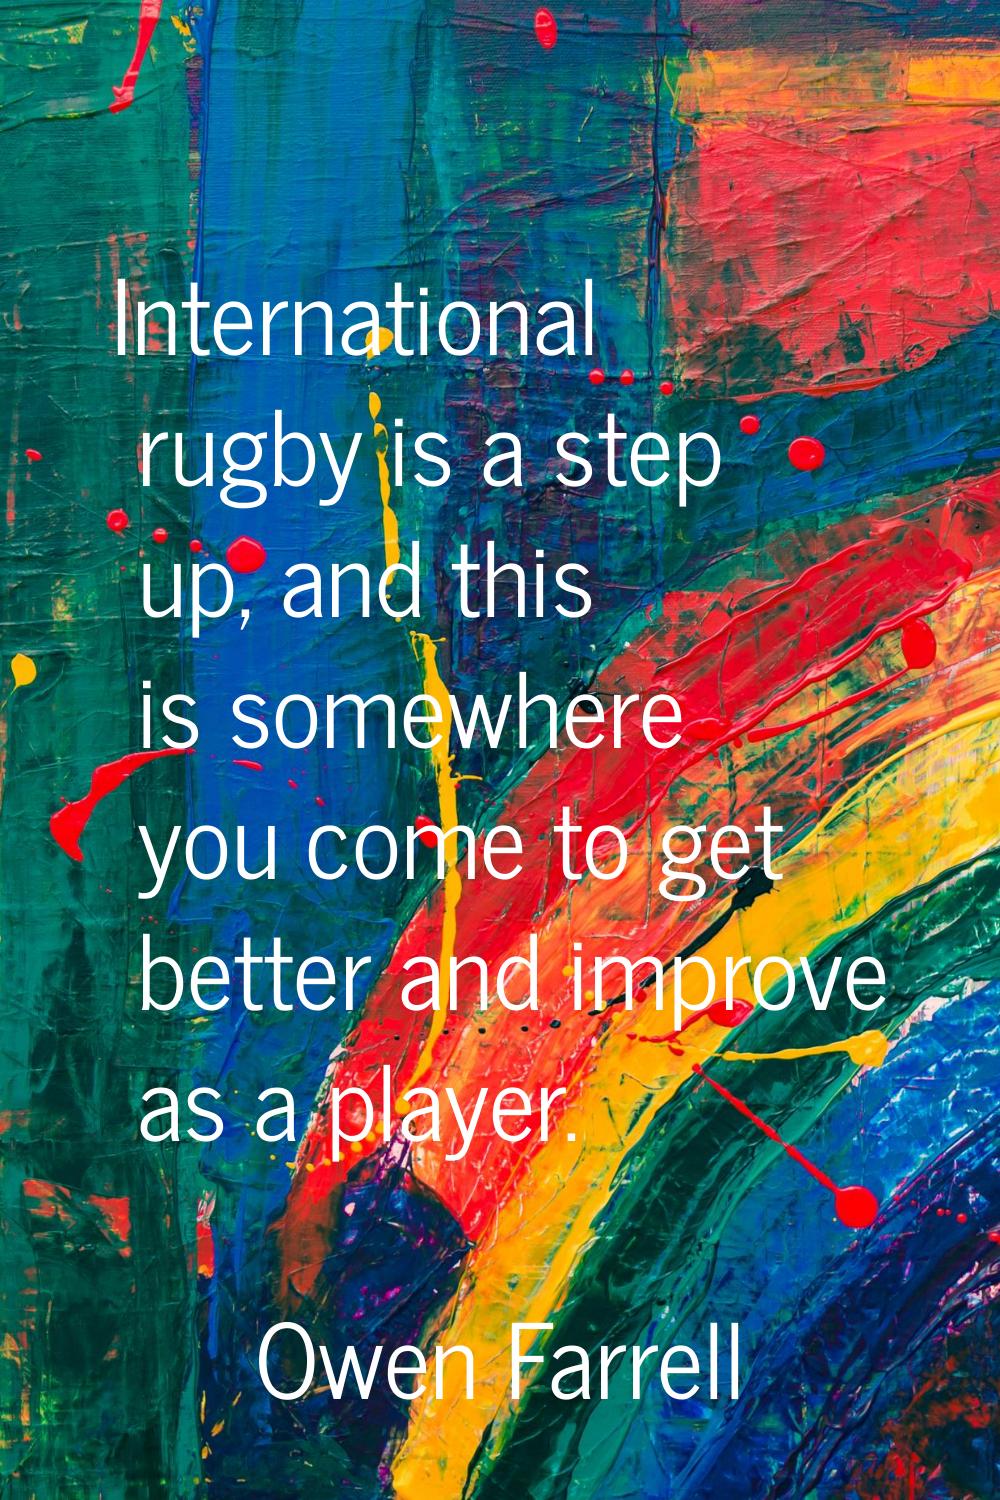 International rugby is a step up, and this is somewhere you come to get better and improve as a pla